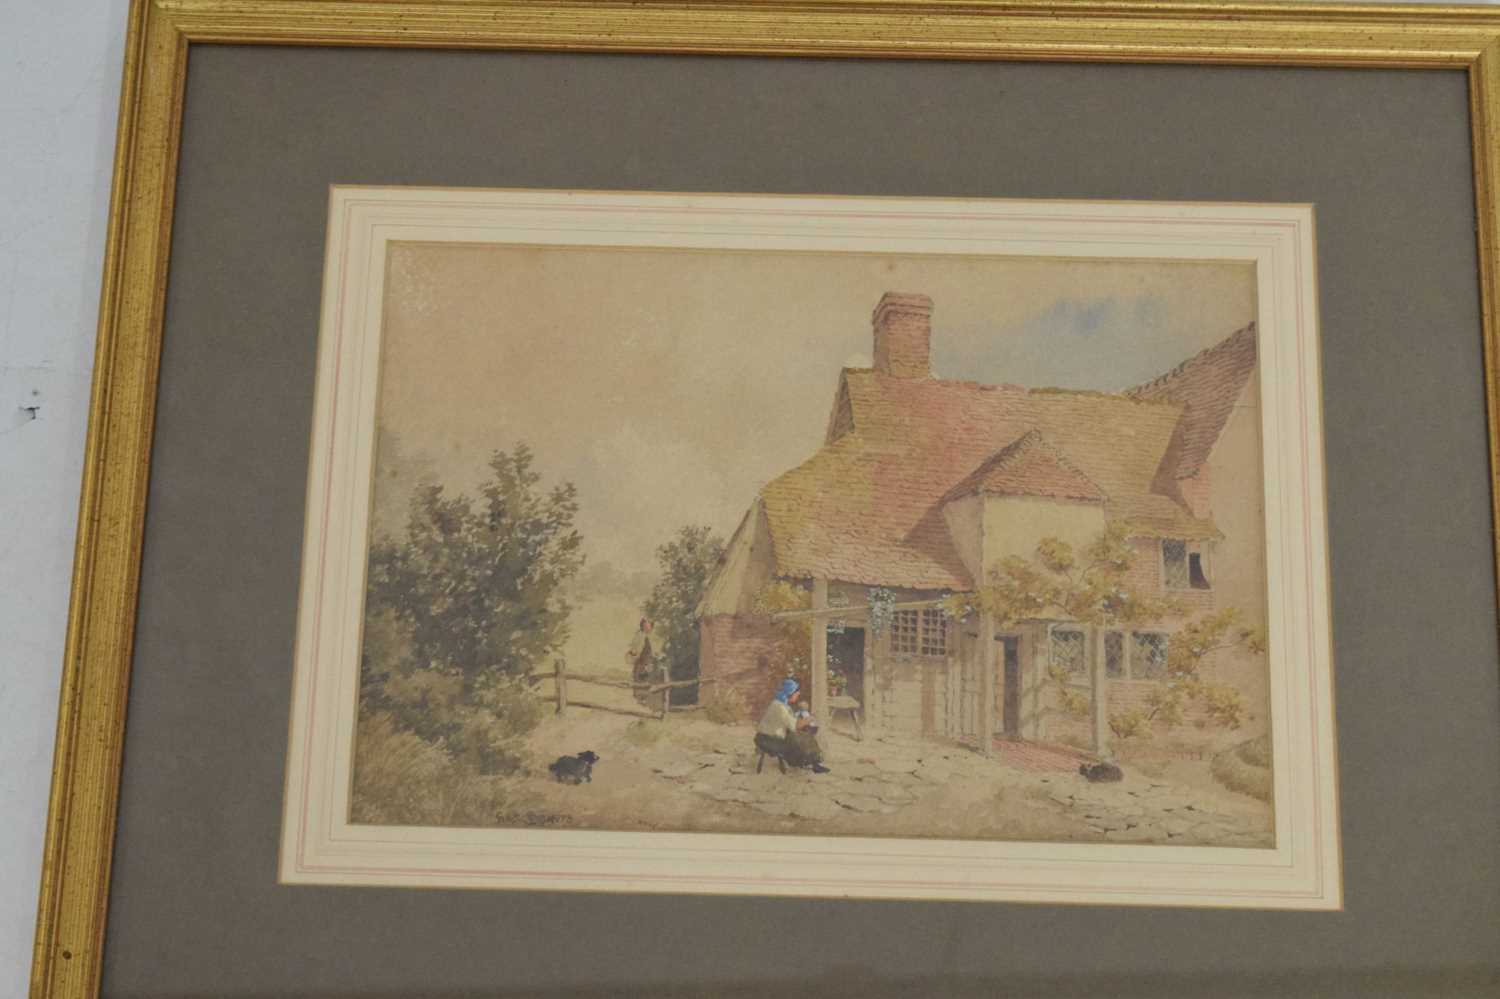 Albert Bowers (exh. 1880-93) - Watercolour - Cottage exterior - Image 7 of 7